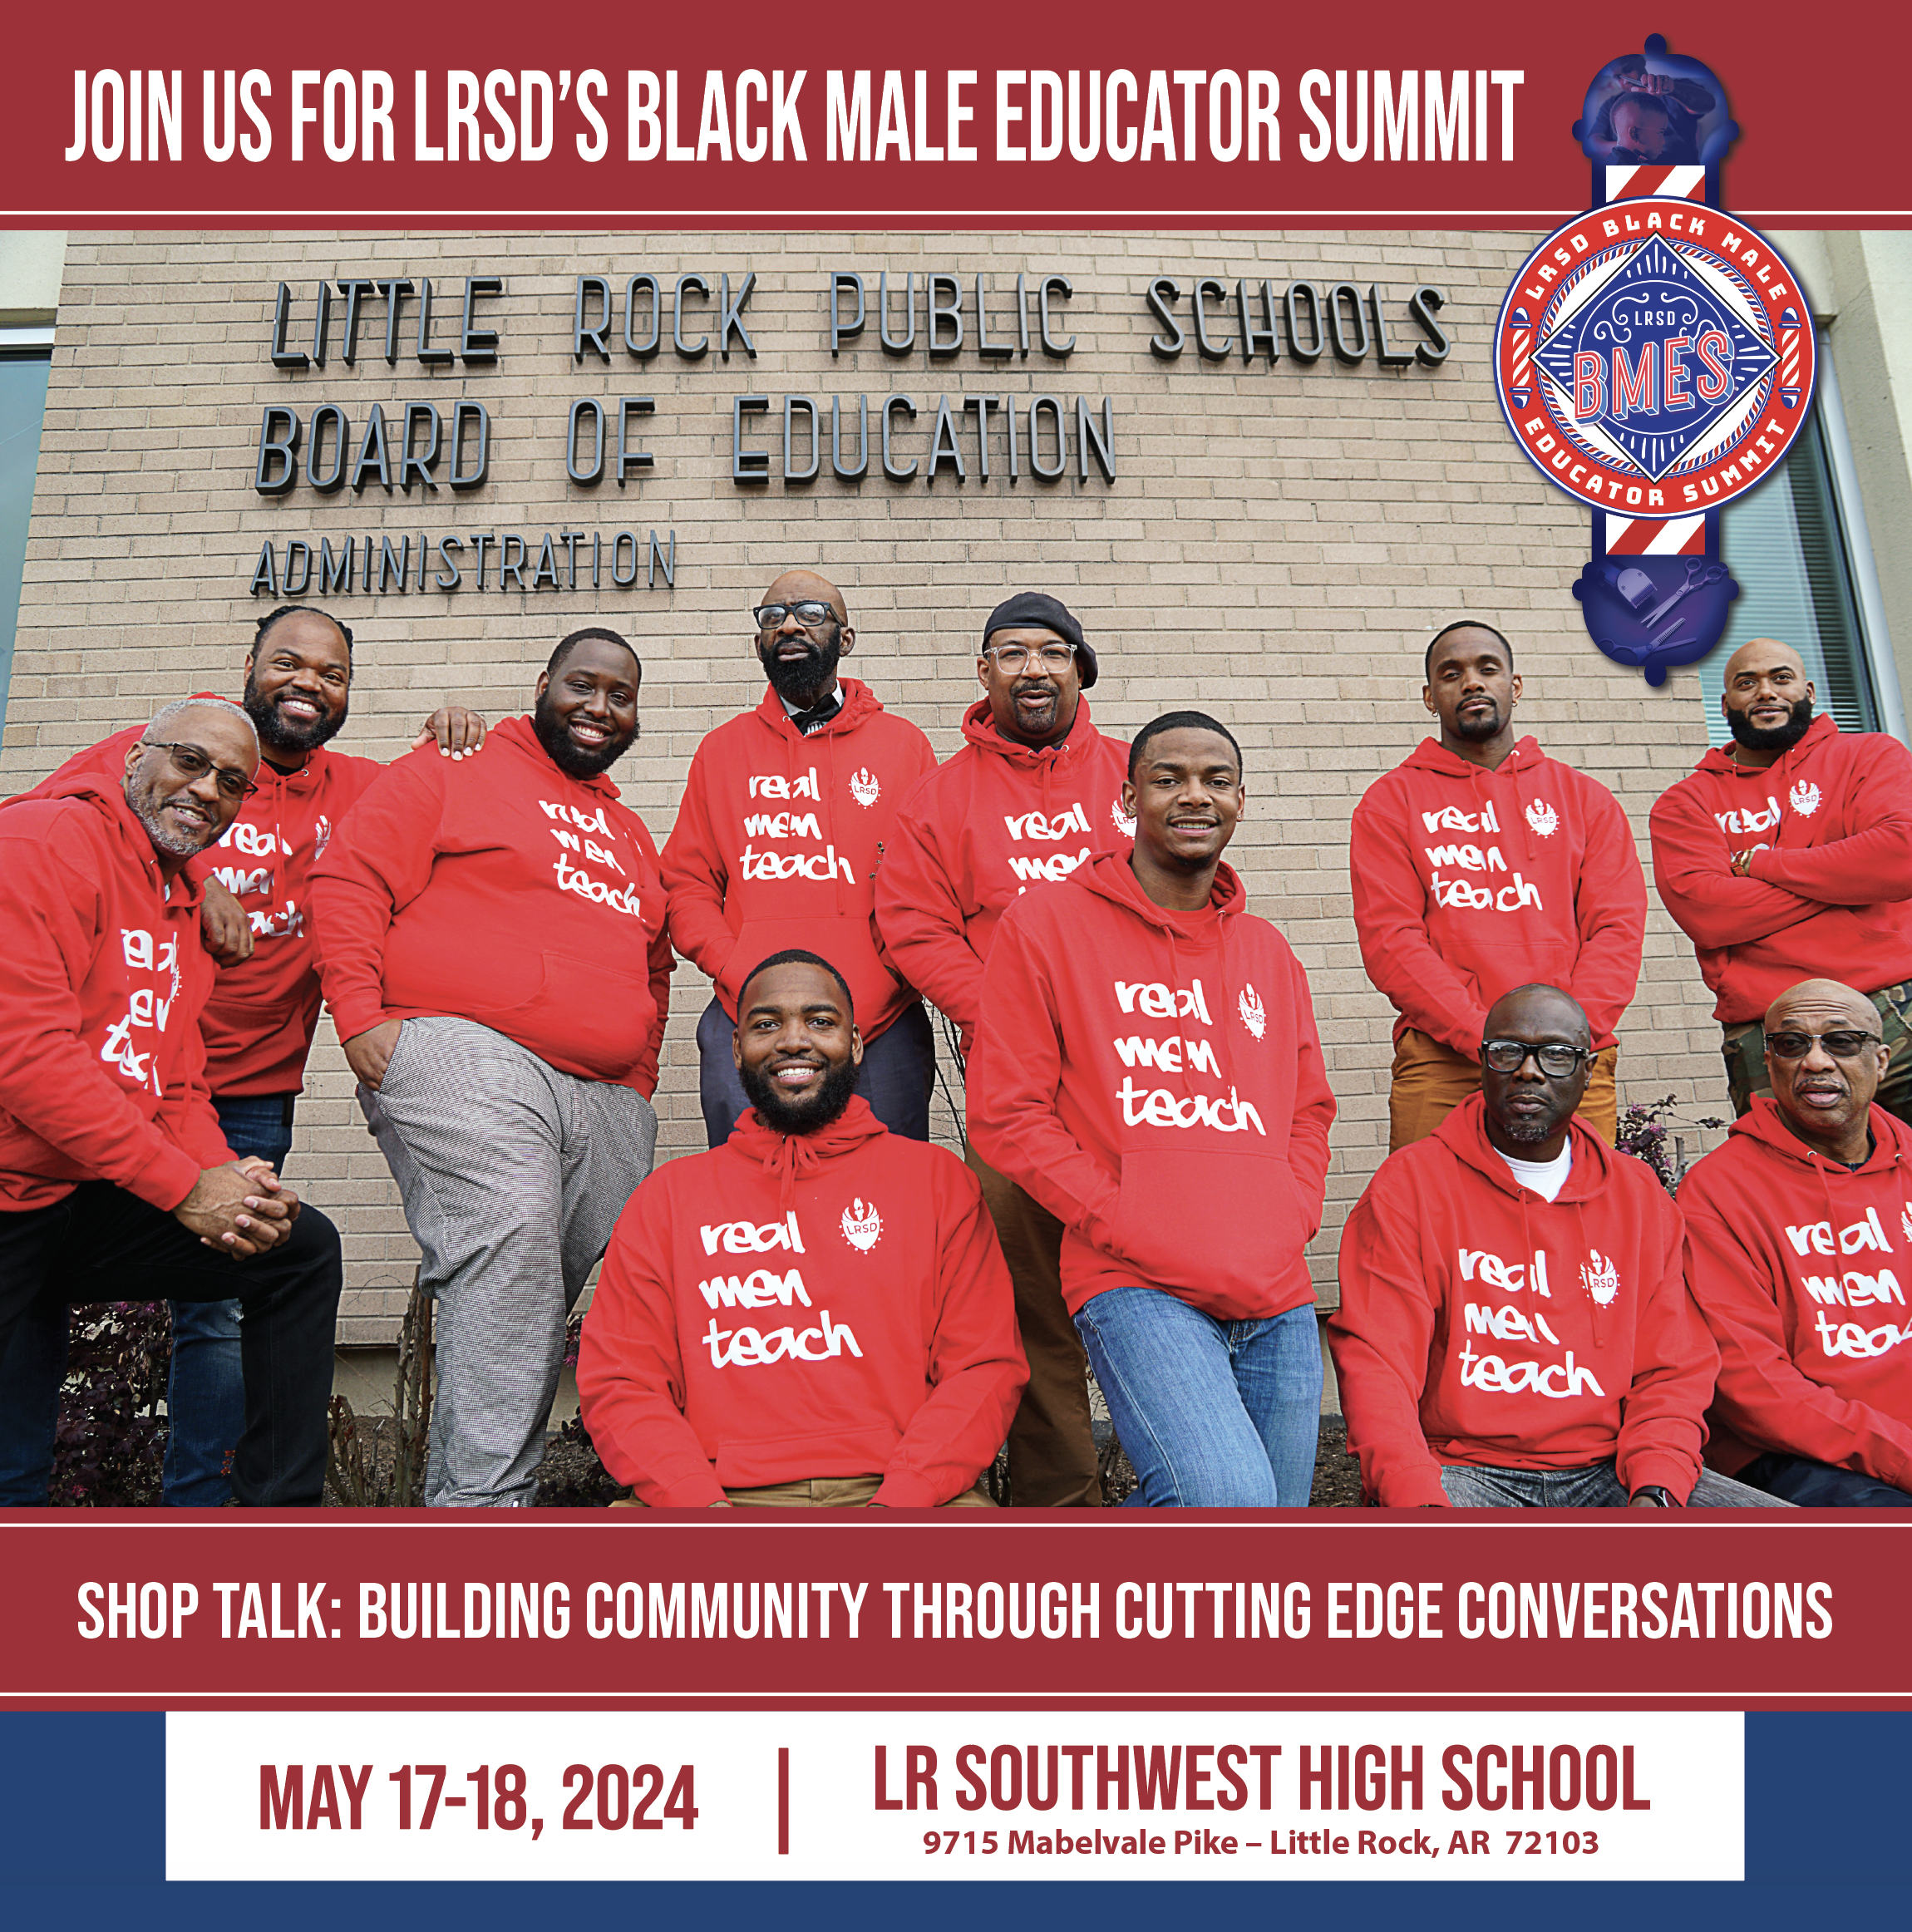 join us for lrsd's black male educator summit shop talk: building community through cutting edge conversations  May 17 - 18 2024 lr southwest high school 9715 mabelvale pike little rock ar 72103